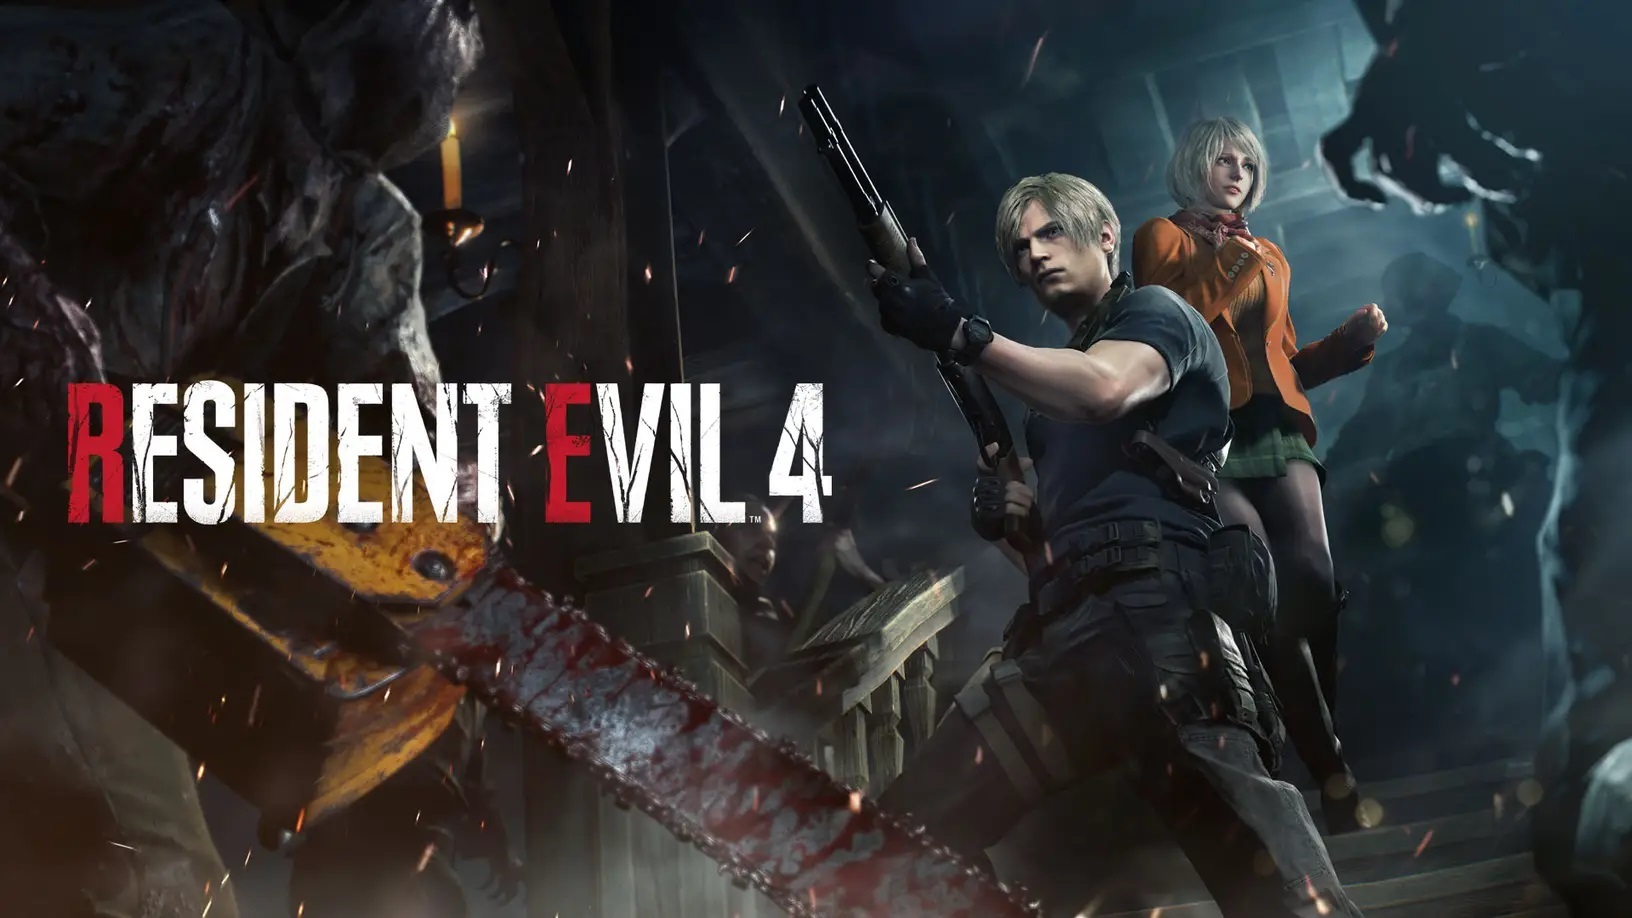 Sales Spain: Resident Evil 4 plays at home and Callisto Protocol takes advantage